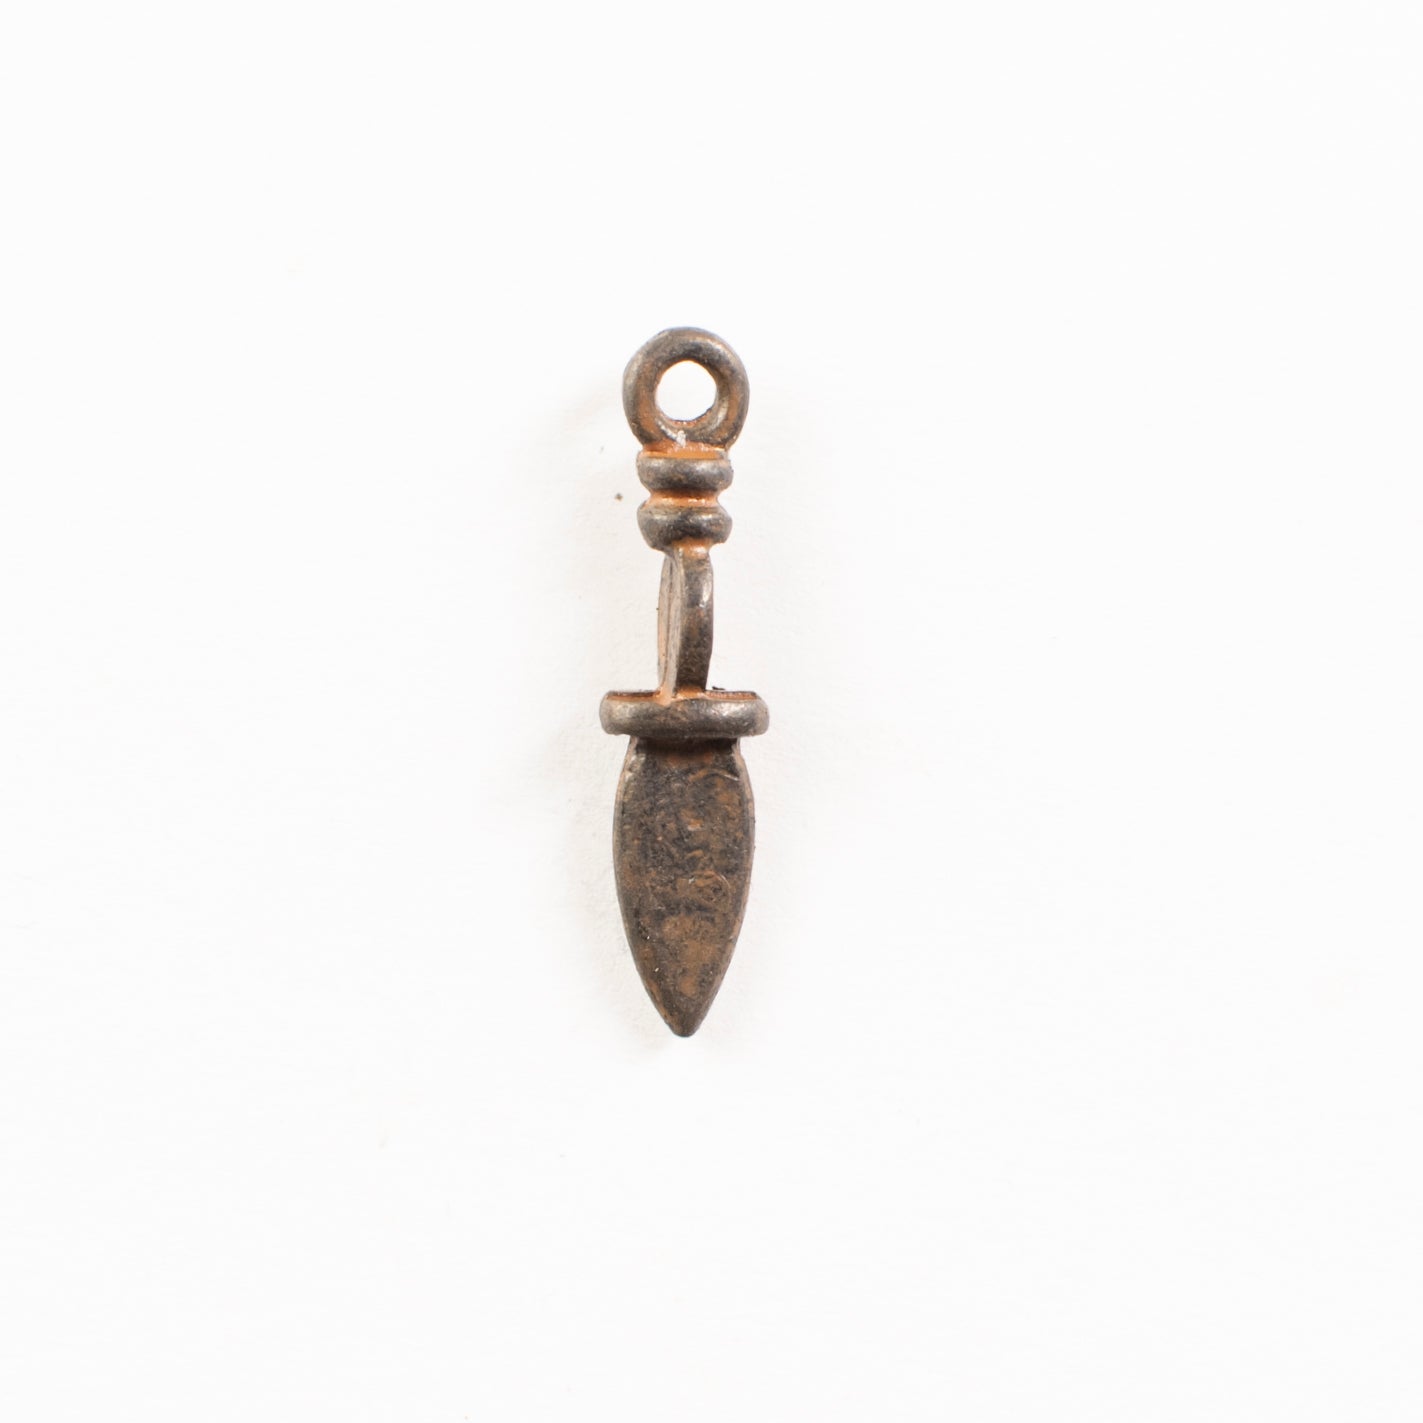 27mm Rustic Central African Dagger Charms, pack of 6